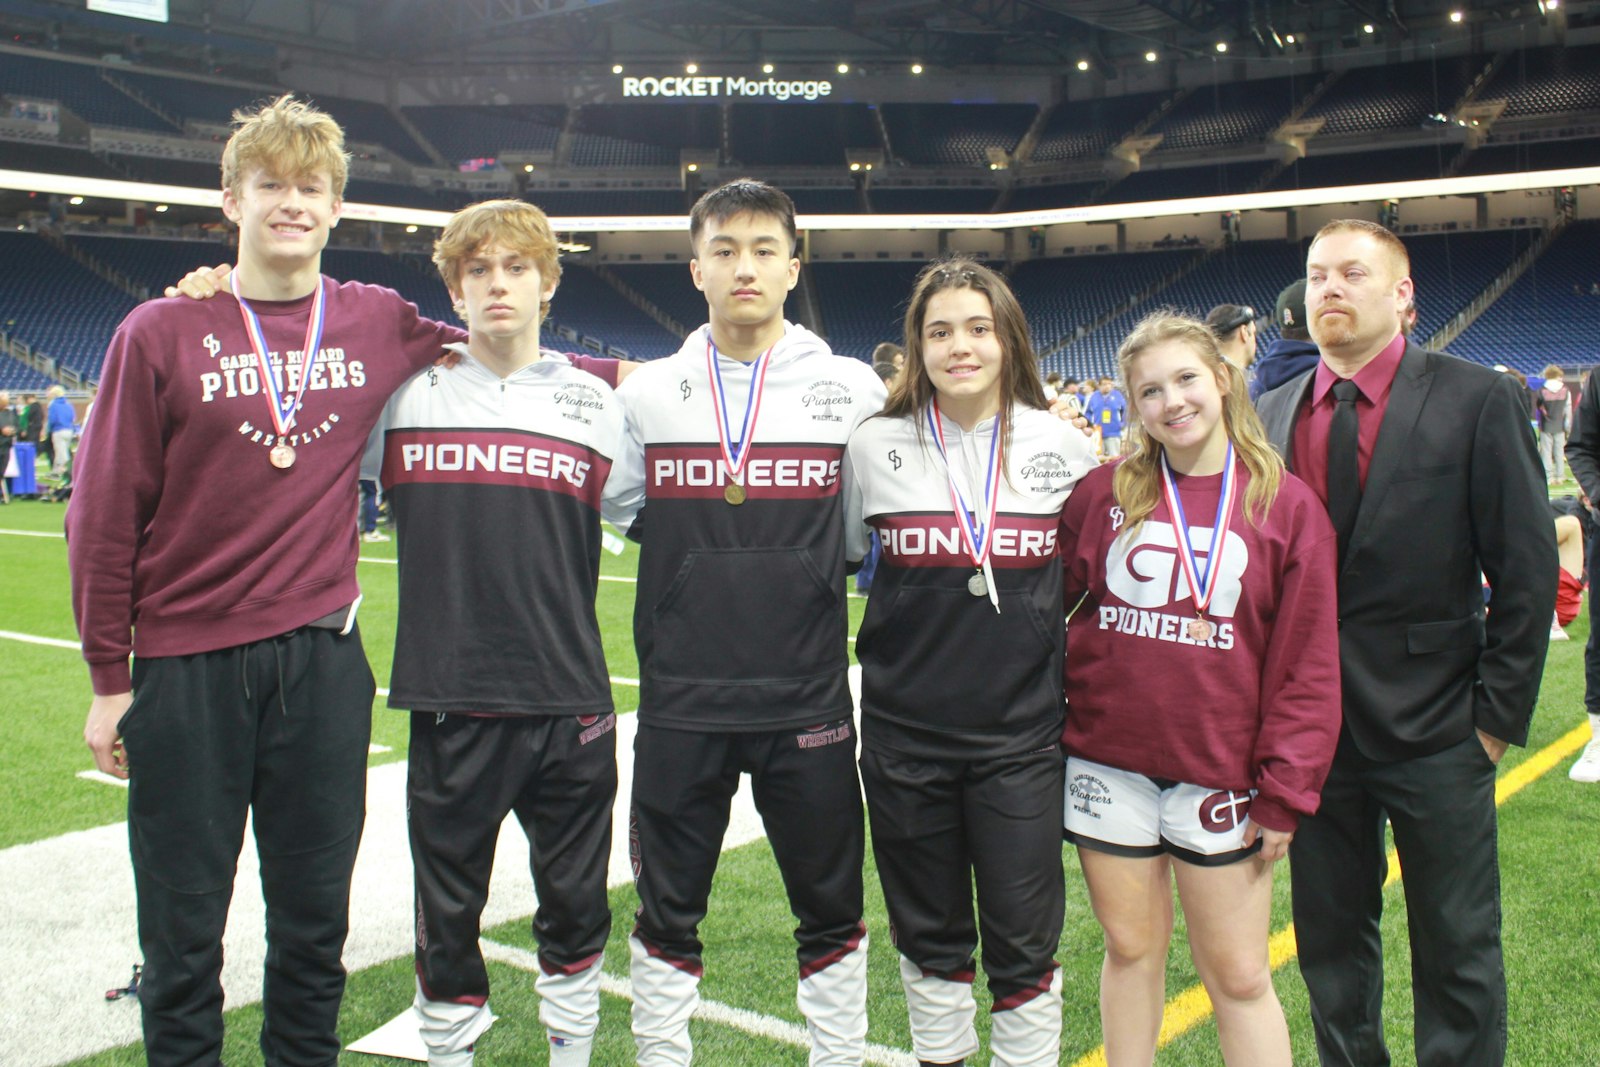 With five all-staters from a team of 13 athletes, Gabriel Richard’s wrestlers must be doing something right.  Joey Calhoun, Luke Harrington, Sebastian Martinez, Rihanna Venegas and Jacey Barnabei show off their championship medals, along with coach Derek Zambon.